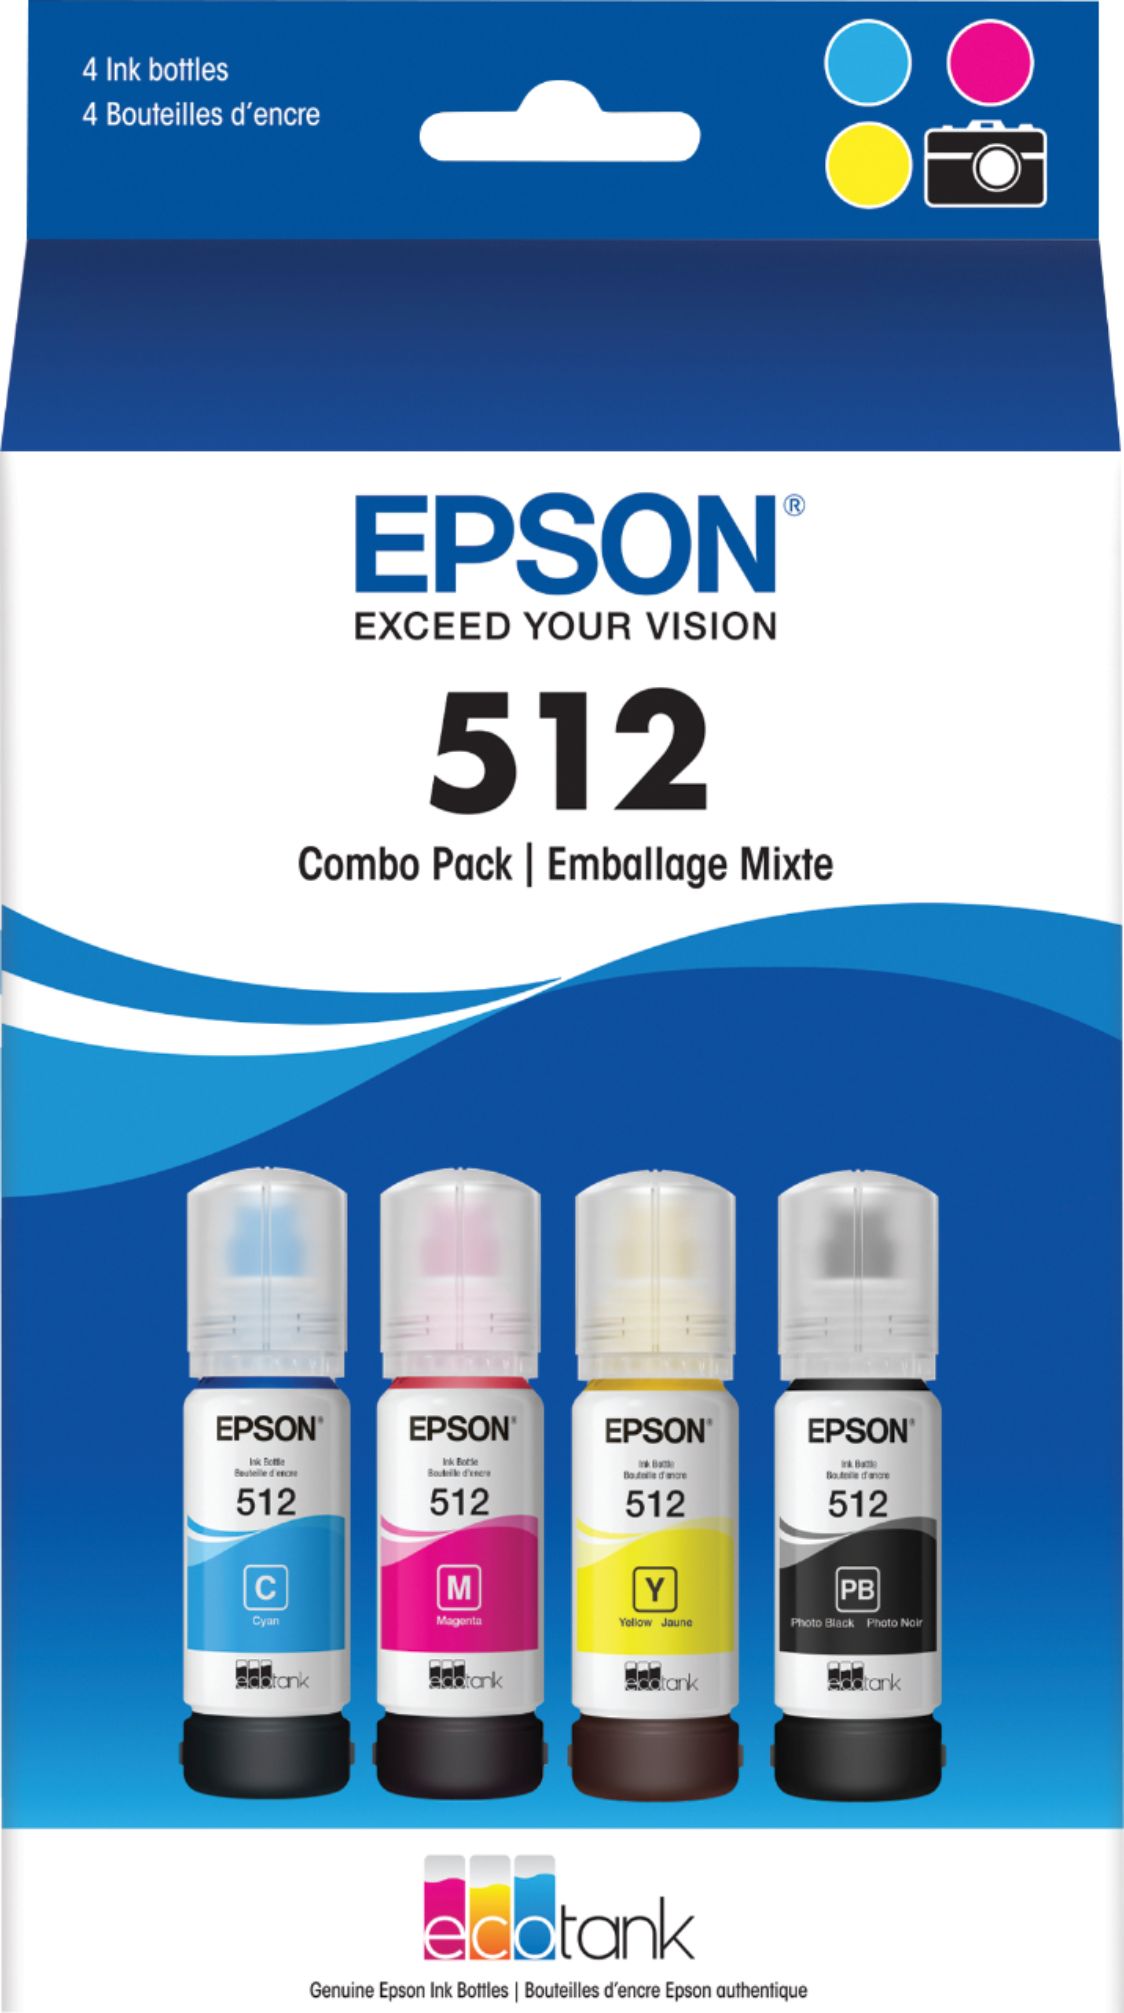  Epson EcoTank ET-3850 Wireless Color All-in-One Cartridge-Free  Supertank Printer with Scanner & 522 EcoTank Ink Ultra-high Capacity Bottle  Black (T522120-S) Works with EcoTank ET-2720 : Office Products